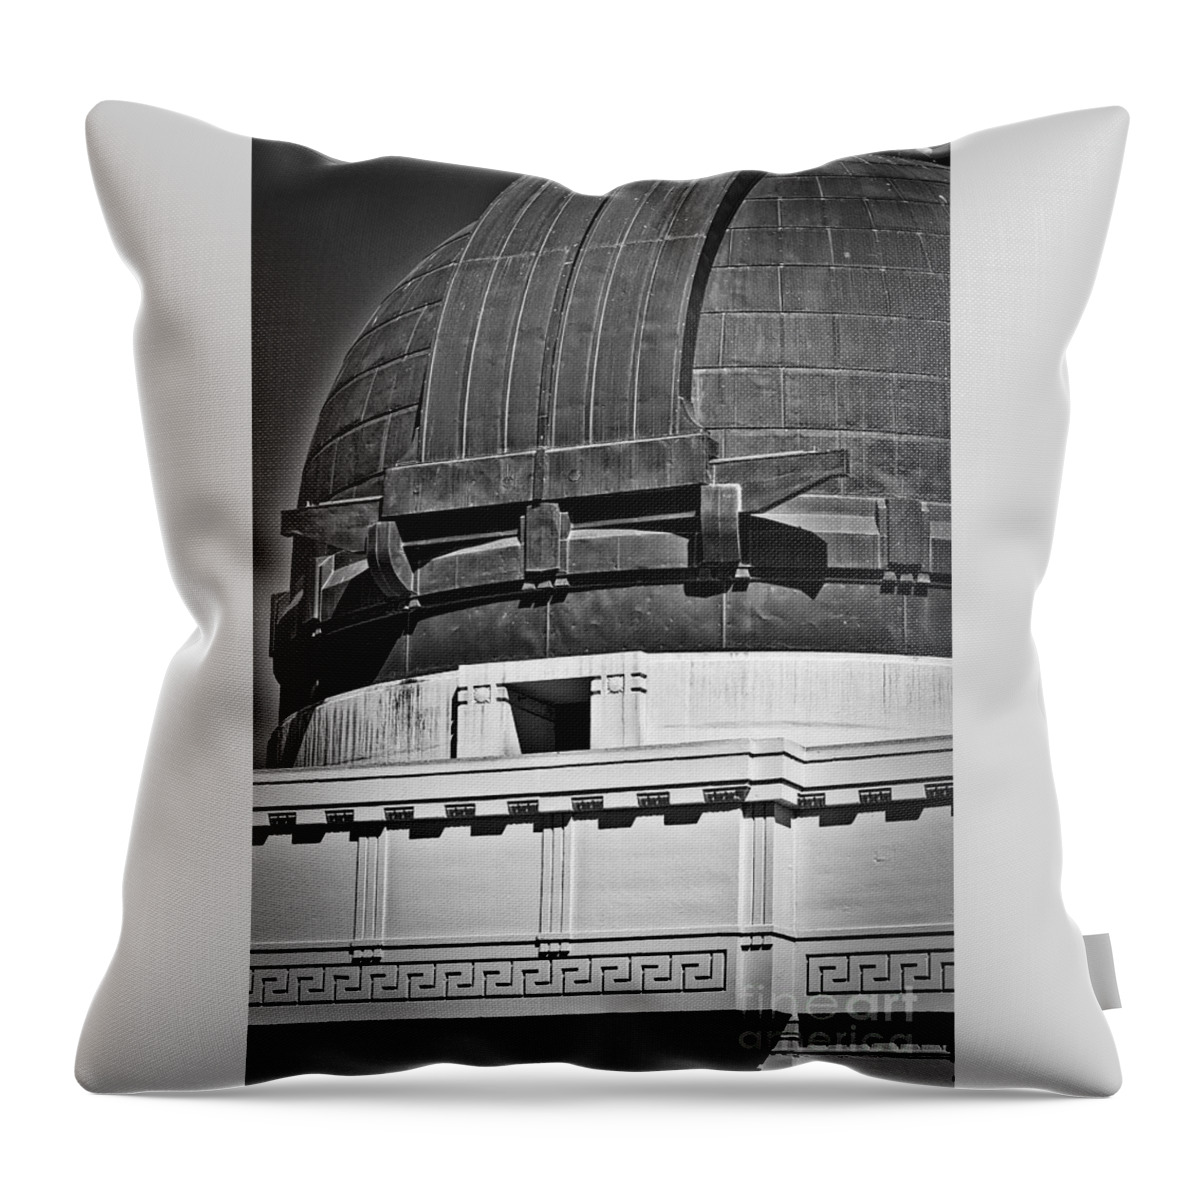 Griffith-park Throw Pillow featuring the photograph Open For The Telescope by Kirt Tisdale